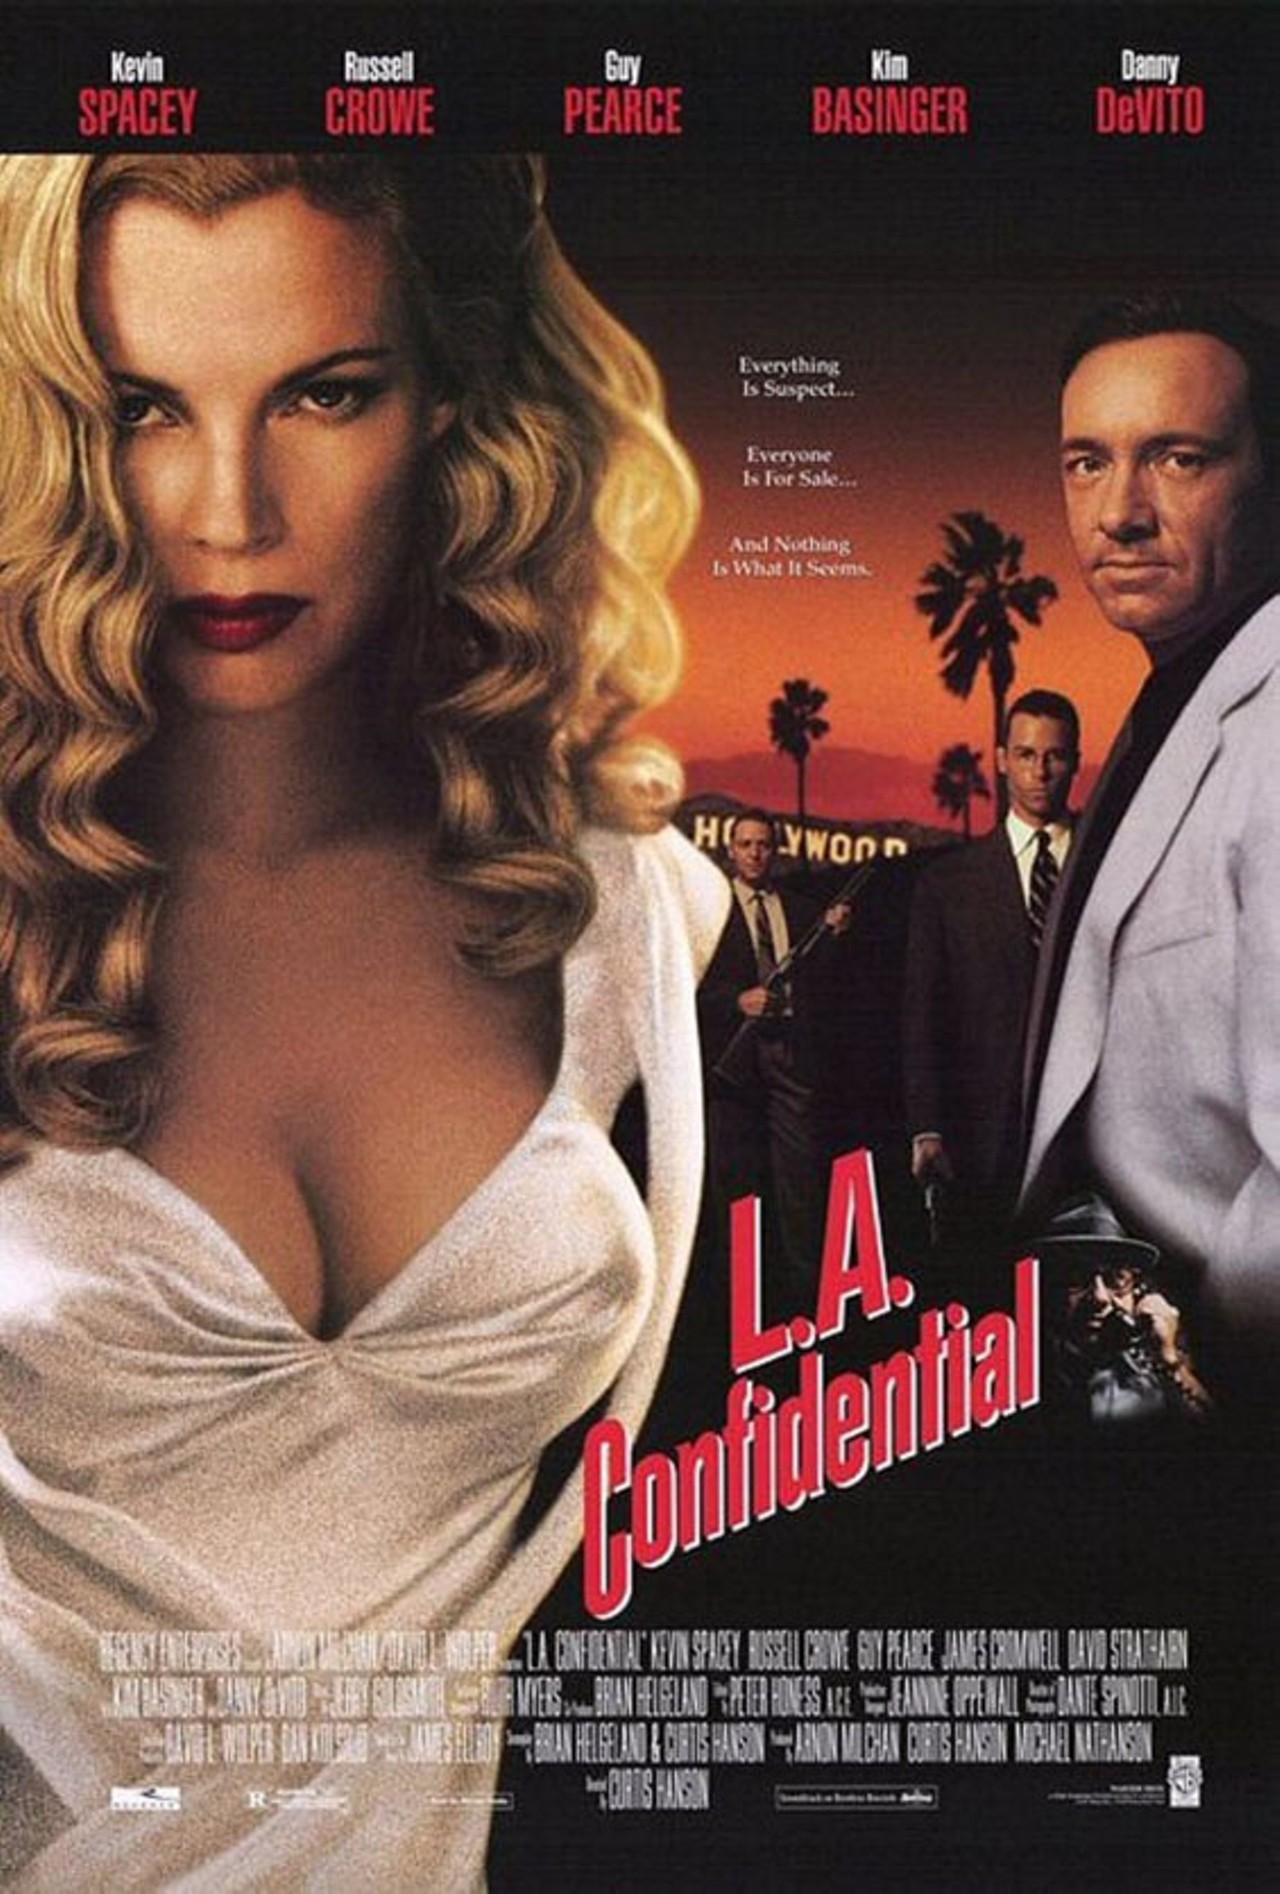 LA Confidential (1997)
Curtis Hanson's adaptation of the James Ellroy best-seller is that rarest of modern Hollywood creations, a crime drama with the brains, sex appeal, humor, danger and action to satisfy all tastes. The best film about Los Angeles since Chinatown.